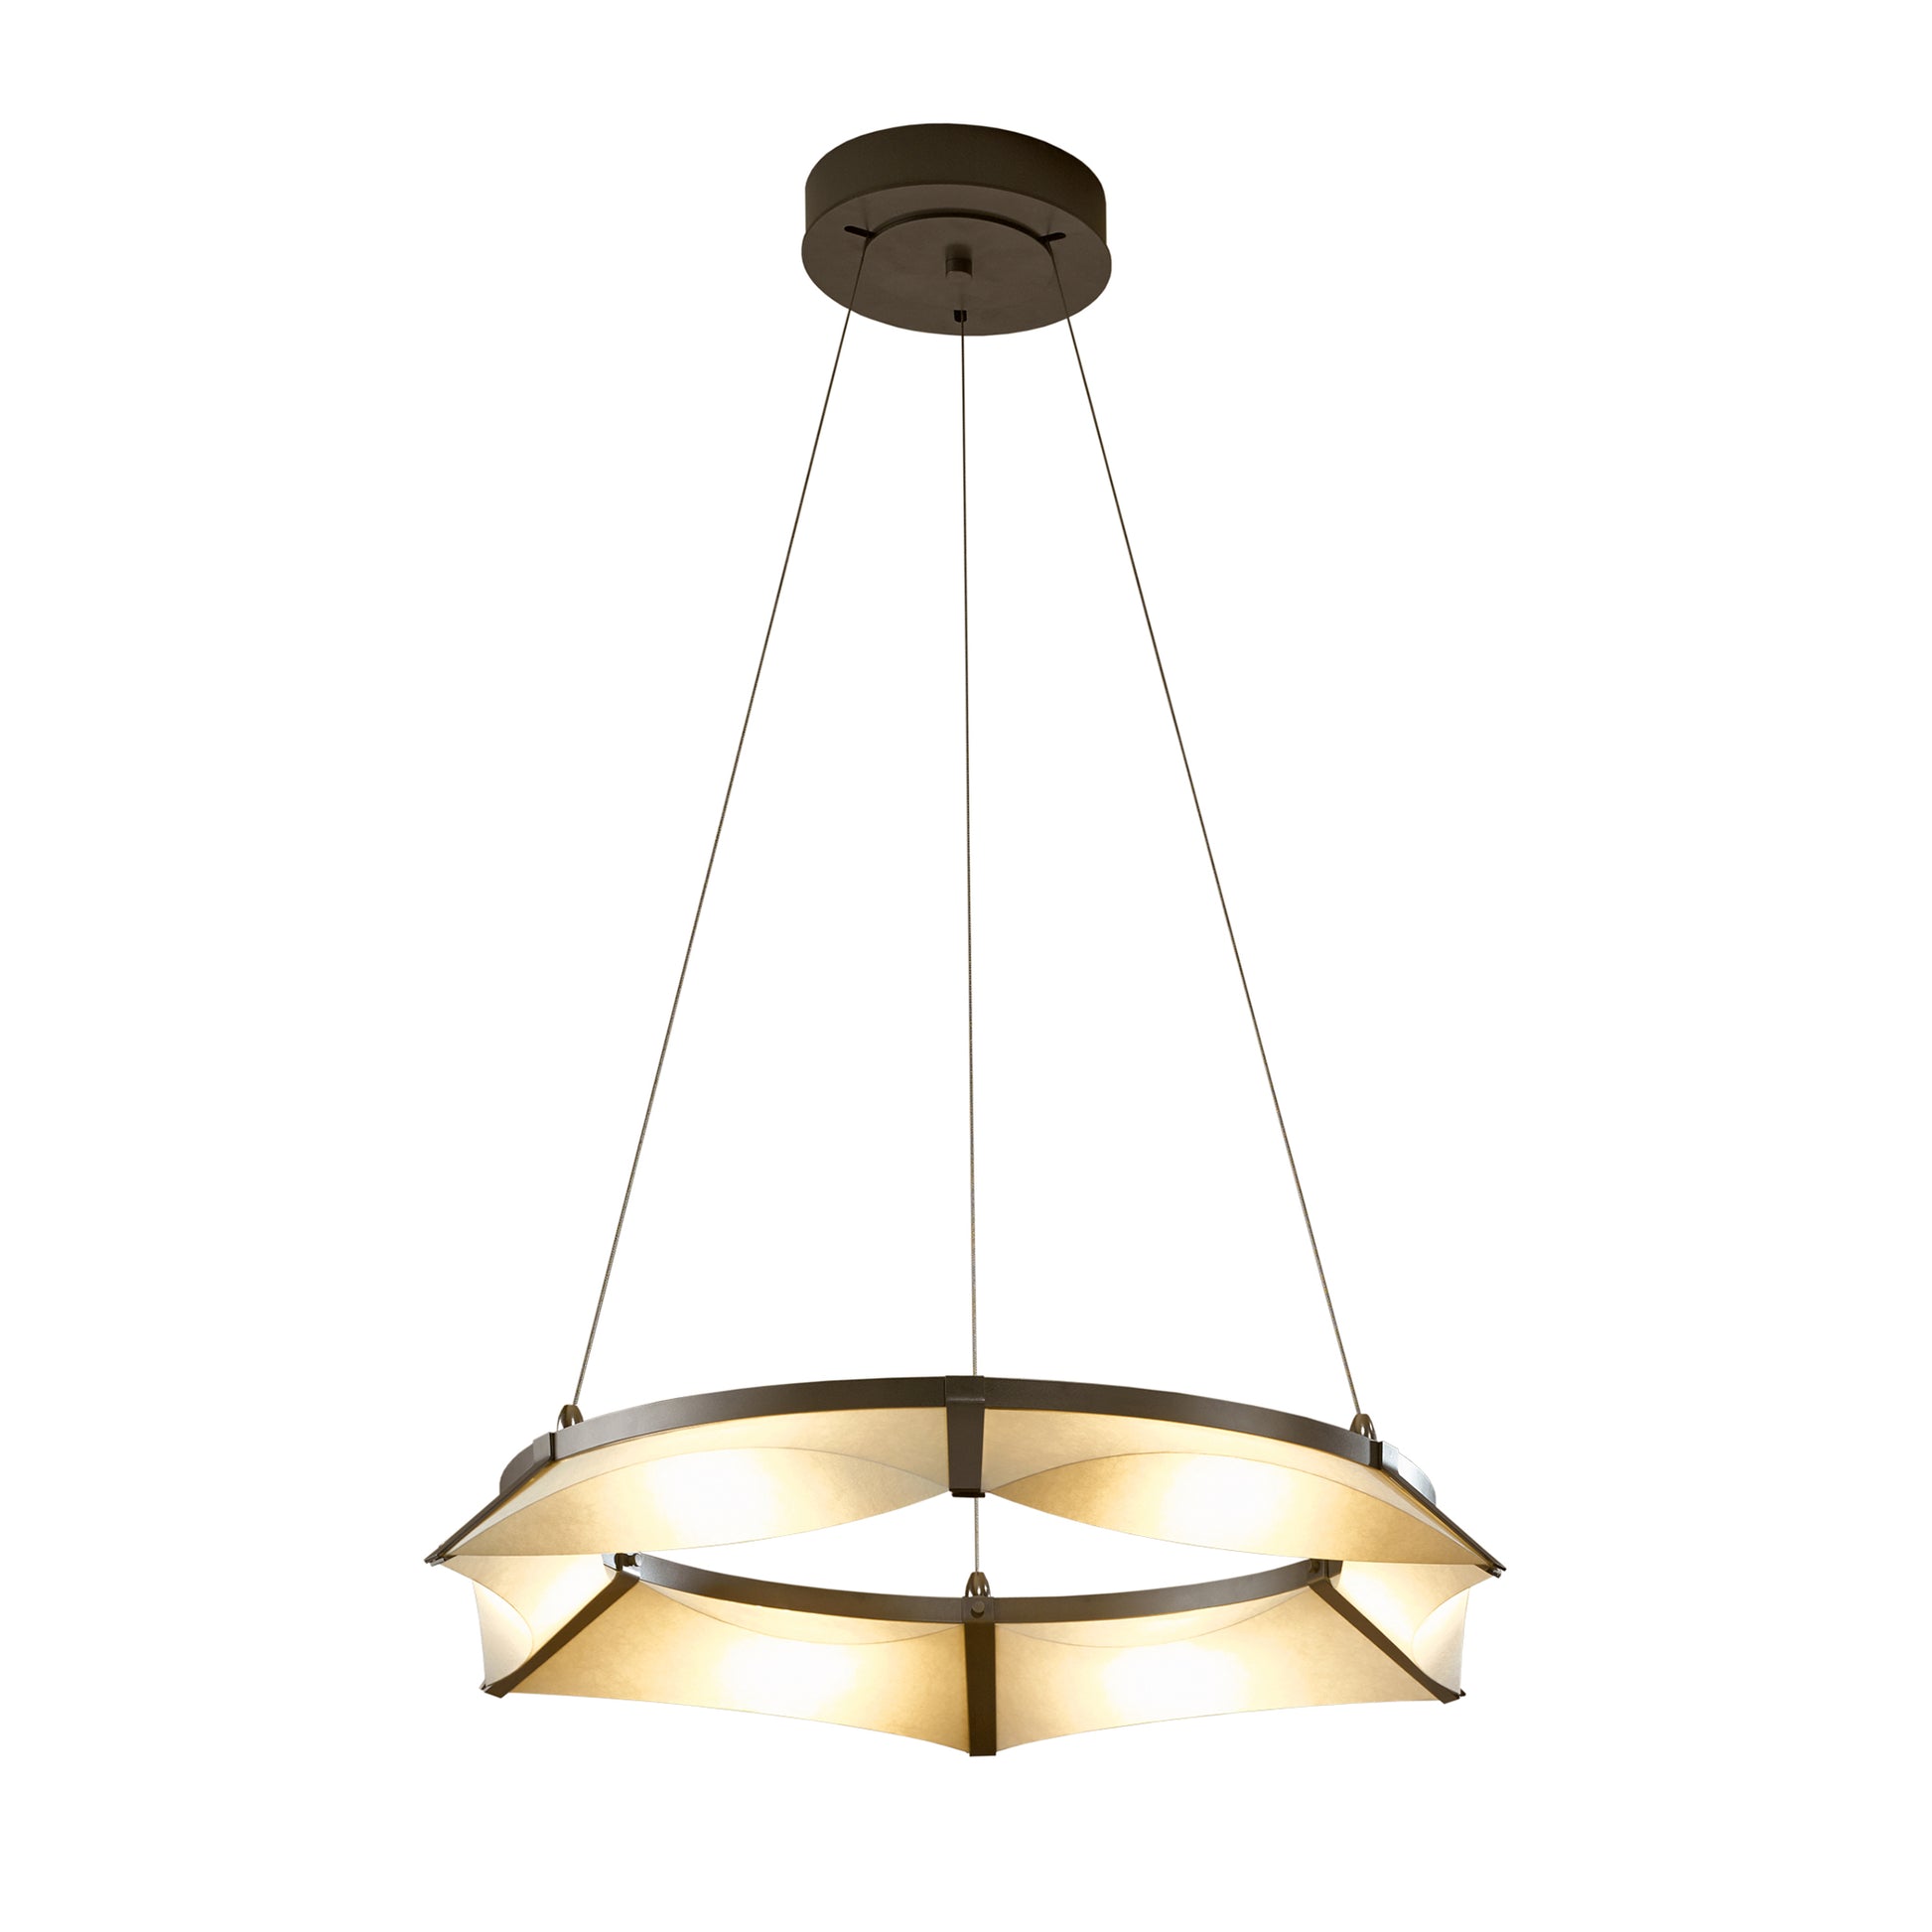 The Hubbardton Forge Bento Pendant is a stunning circular pendant light that elegantly hangs from the ceiling.